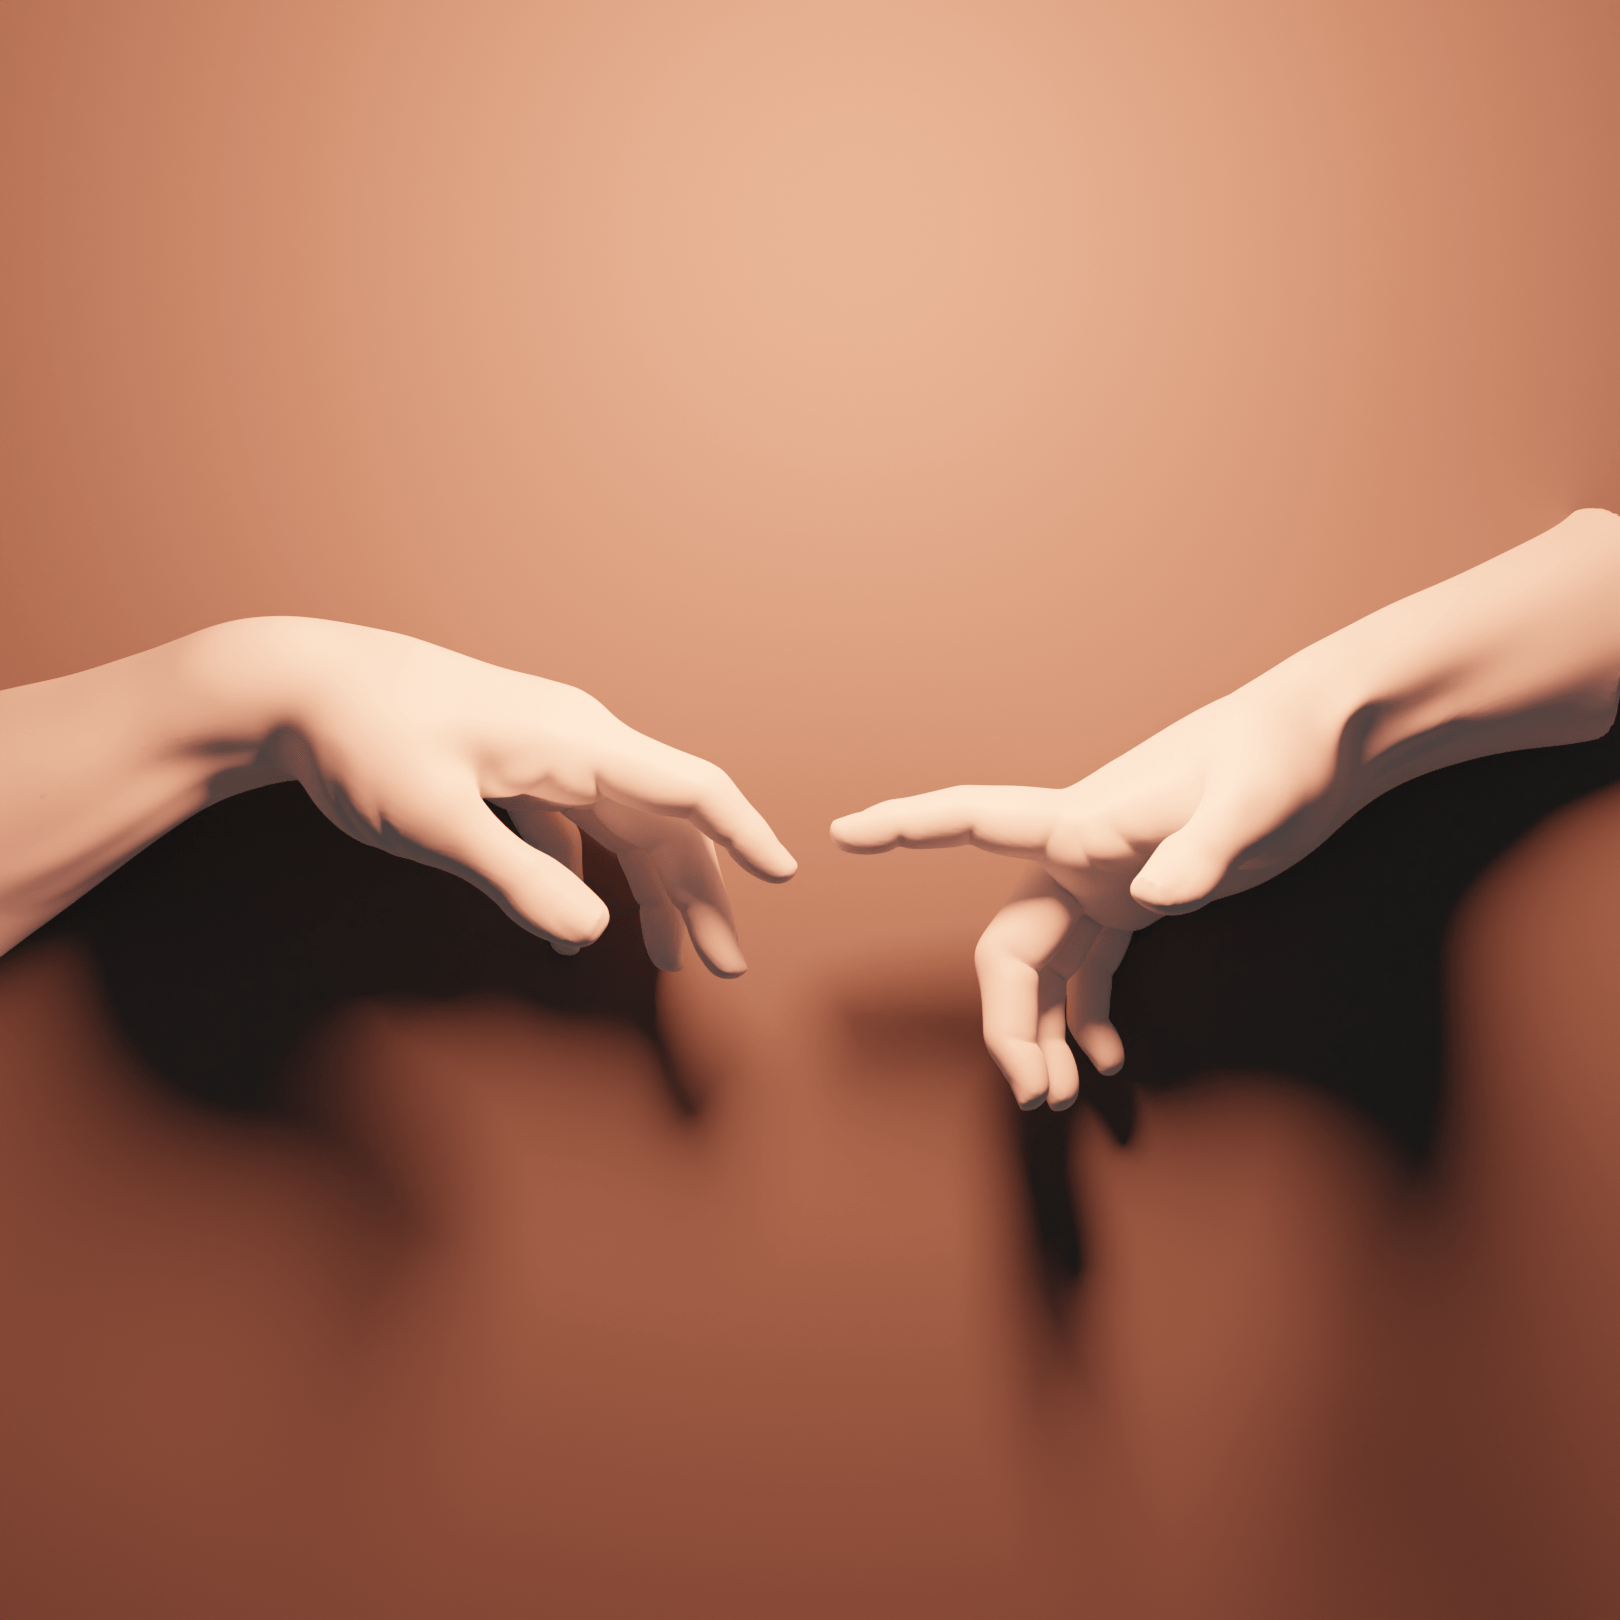 Two hands in the air, one in front of the other, as if holding hands or touching. - The Creation of Adam